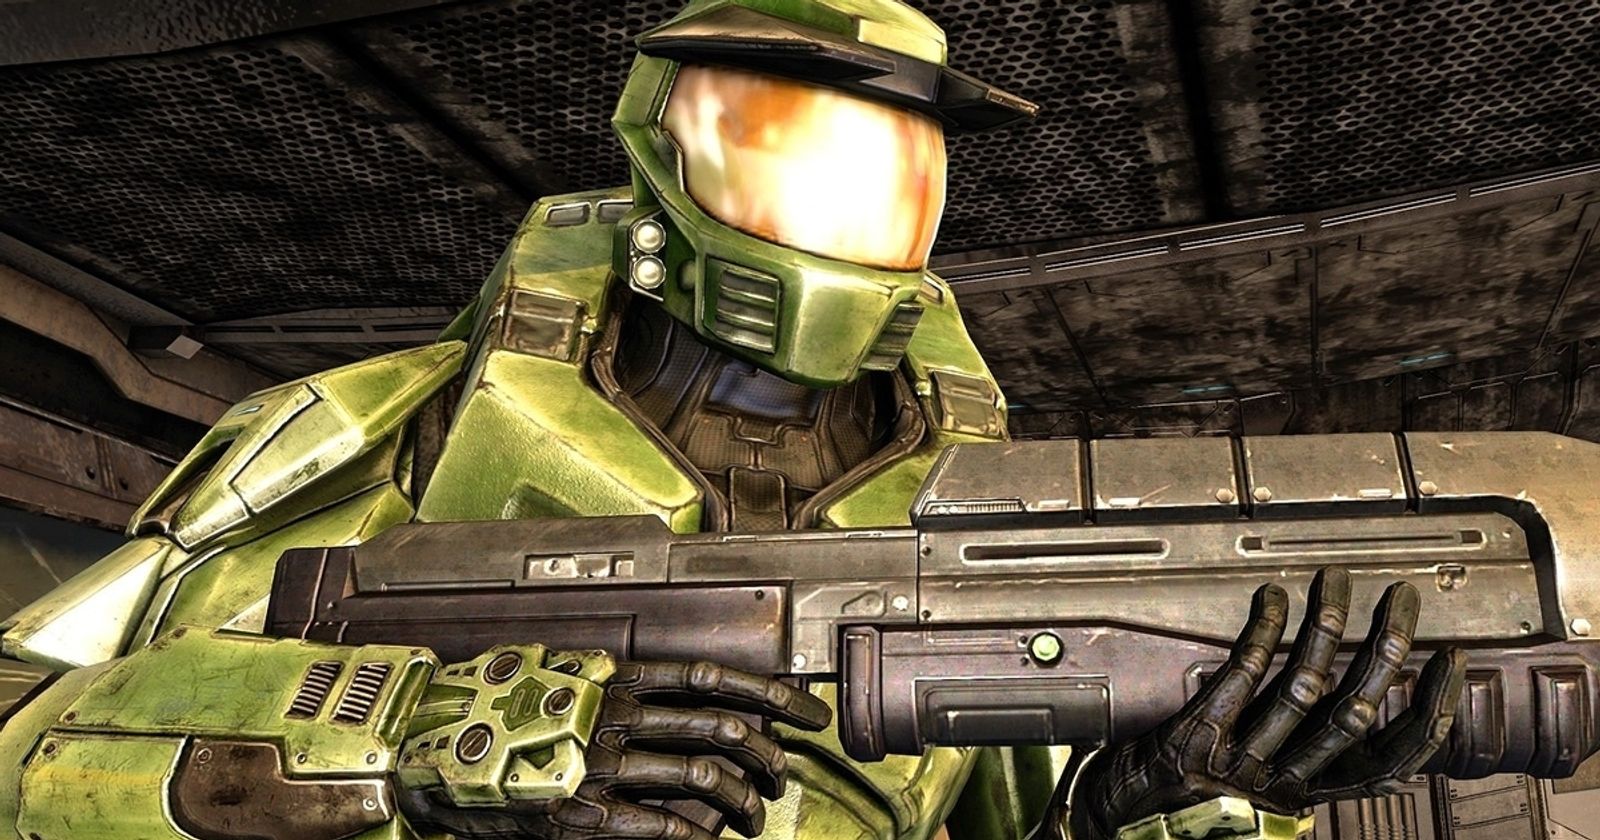 Halo Combat Evolved PC Multiplayer In 2021